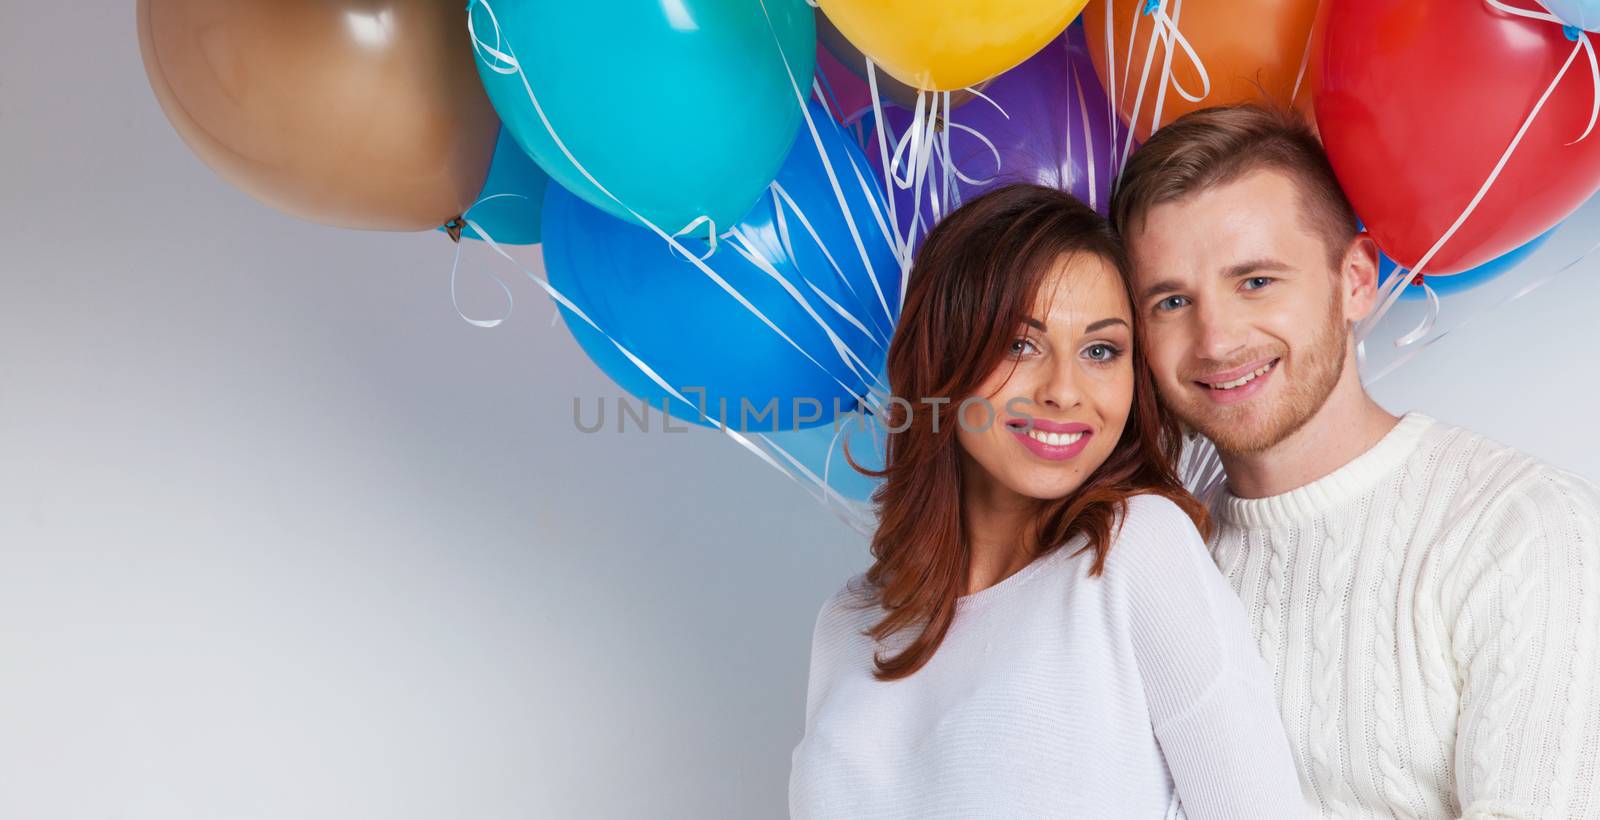 Young smiling couple with colorful balloons on white